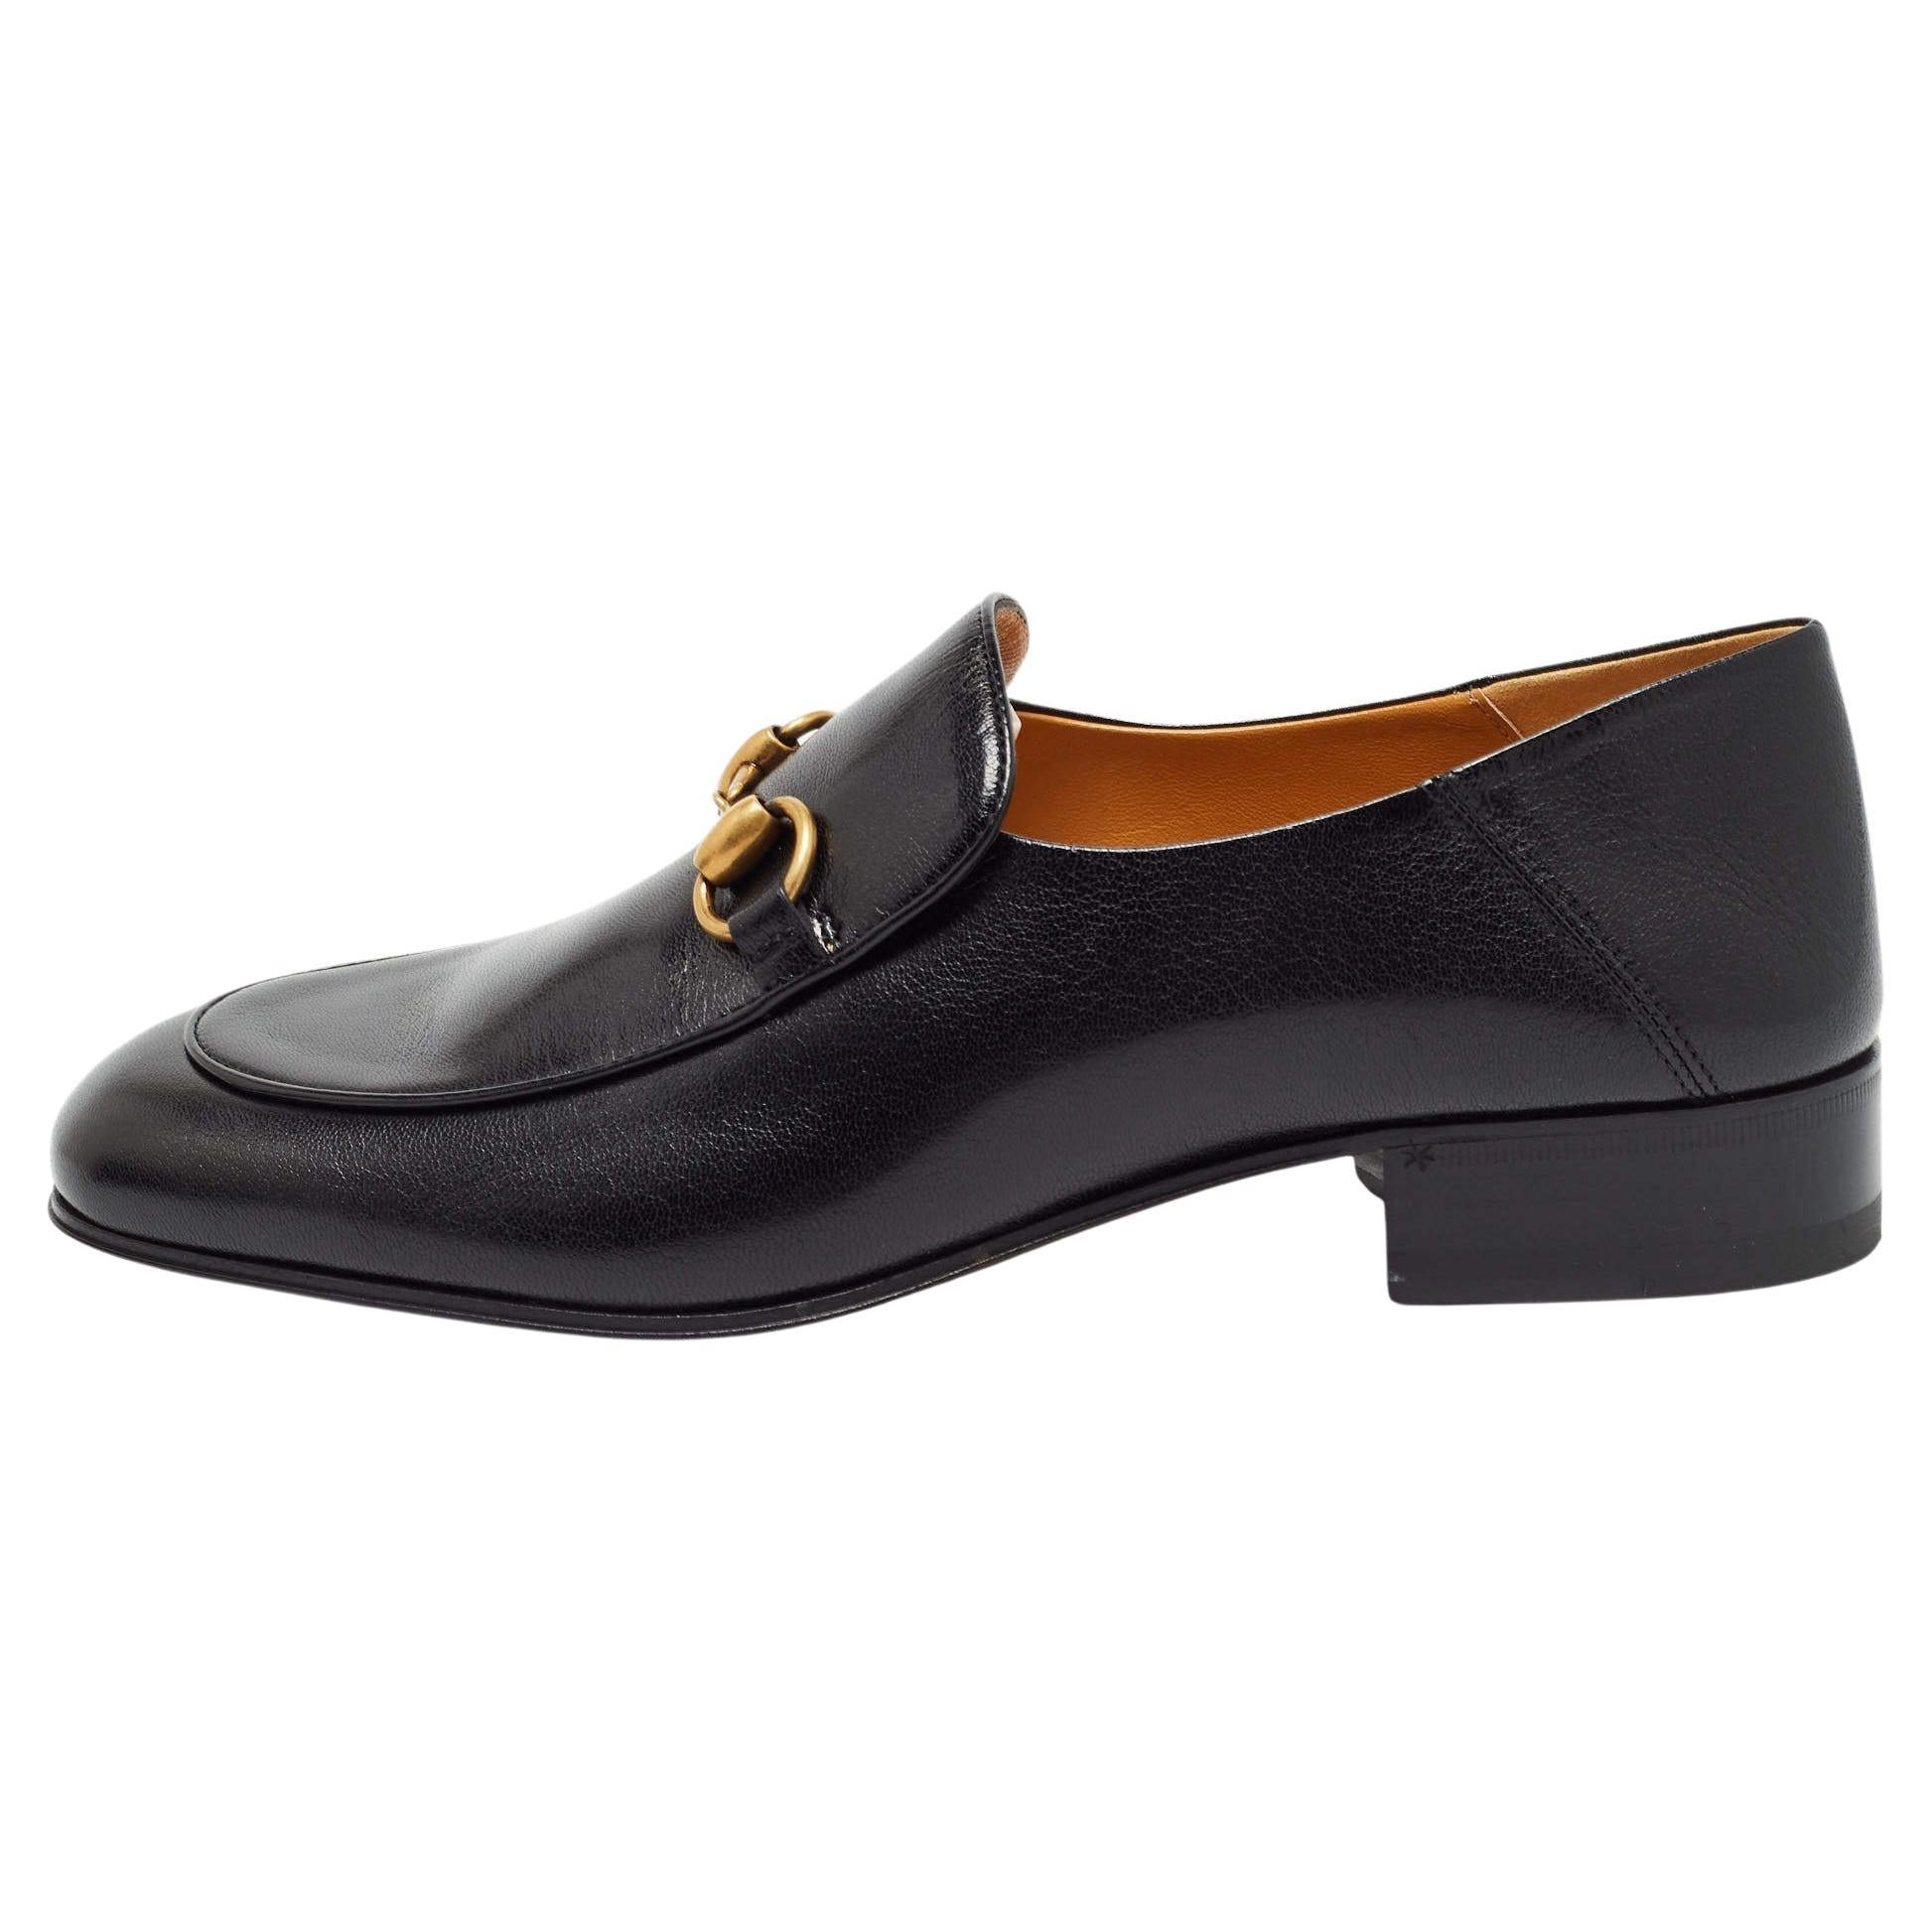 Gucci Black Leather Horsebit Foldable Loafers Size 39